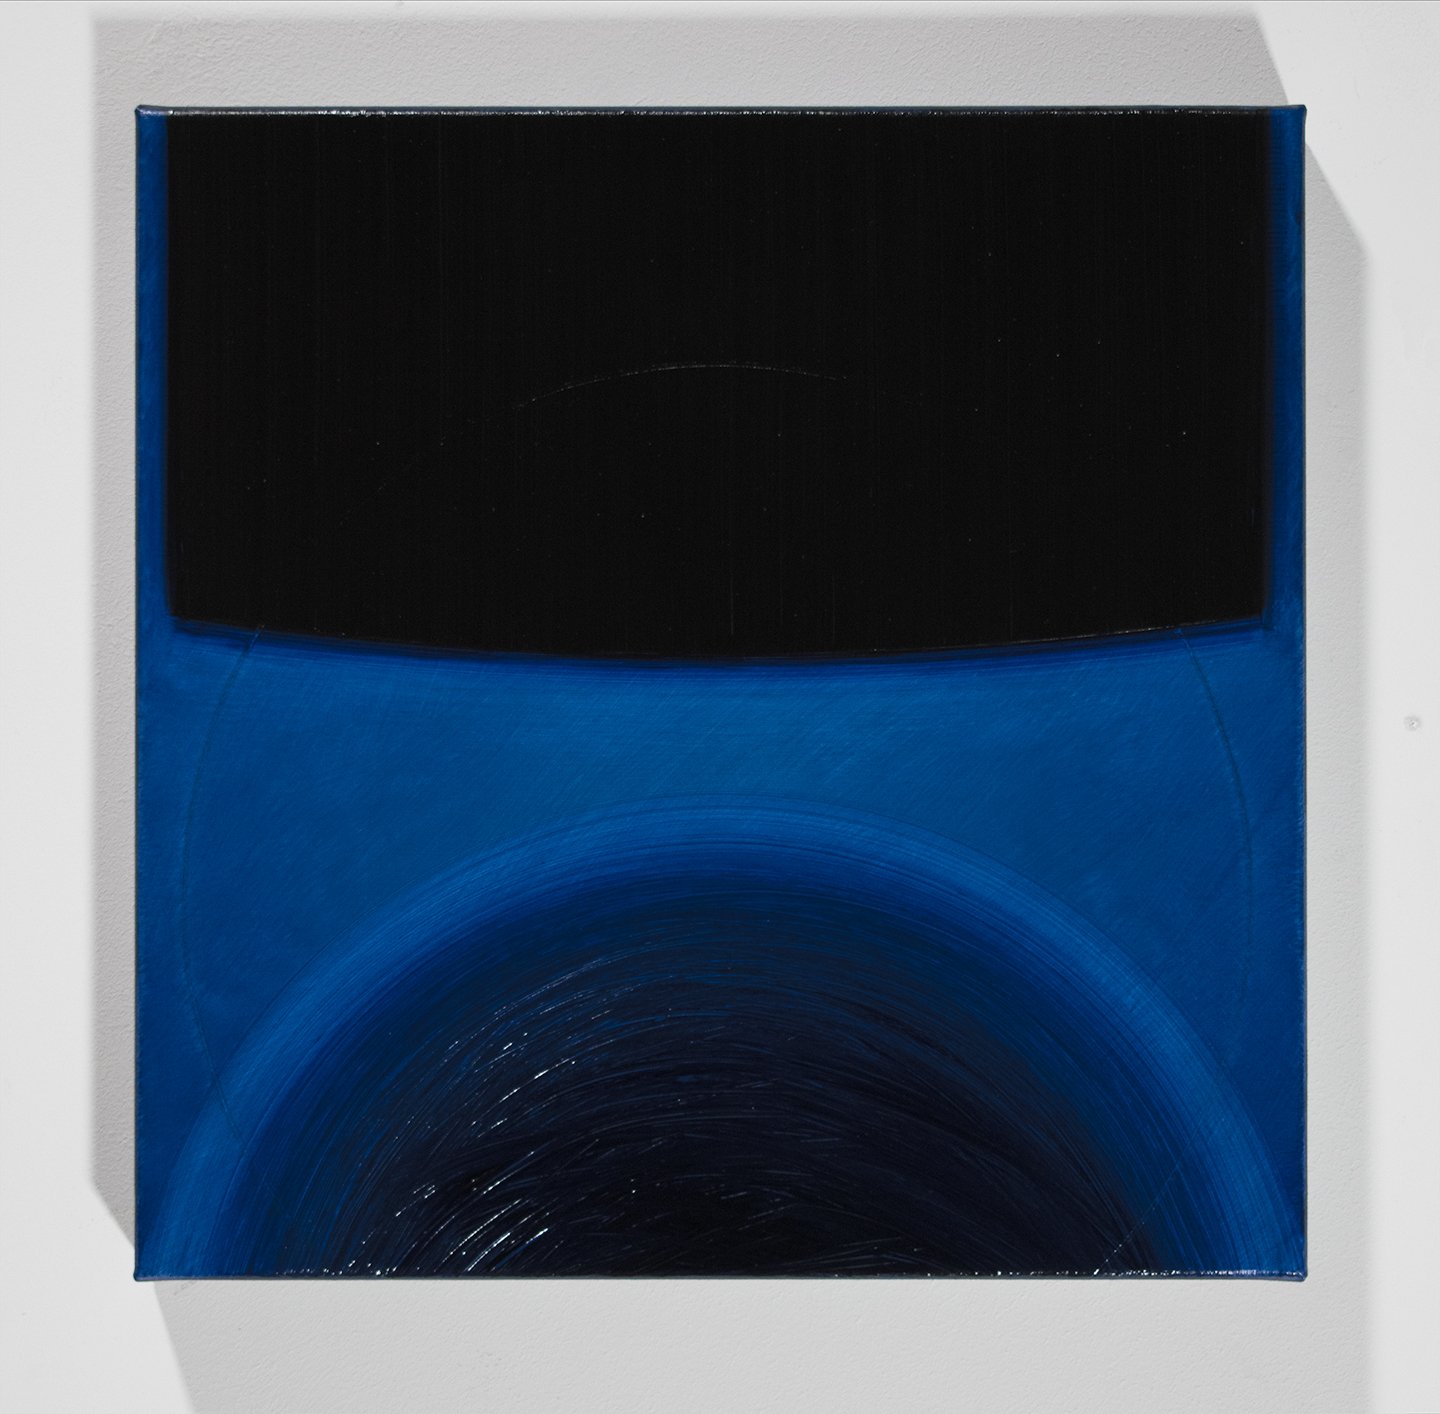 13 Above-metrum [2001-20220116], oil on canvas, 17.75x17.75 in. [45x45cm]_b (Copy)